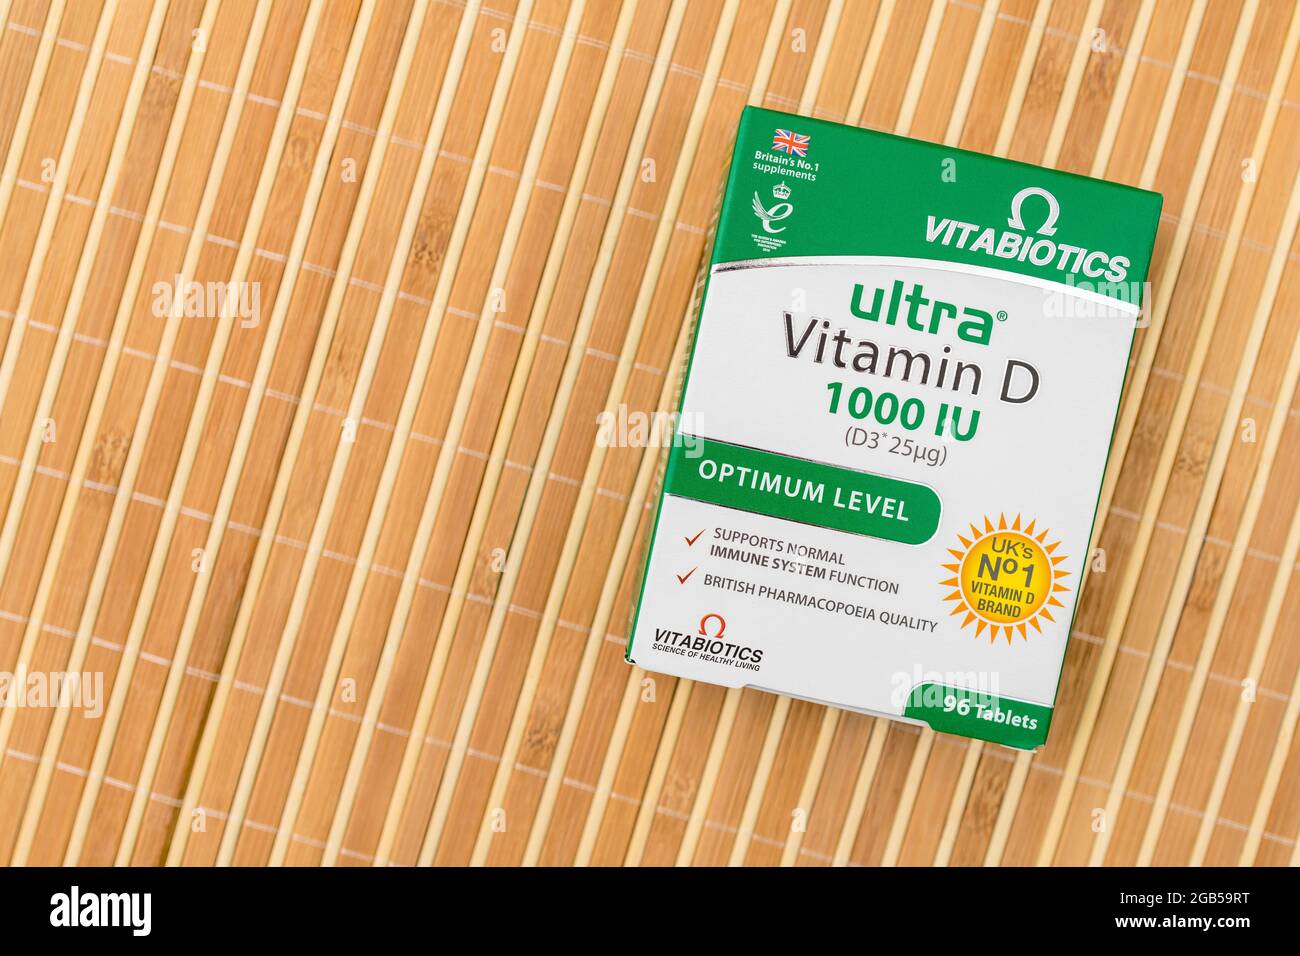 Box Of Vitabiotics Vitamin D 3 Tablets Called The Sunshine Vit D Is Important In The Diet Severe Lack Of Sunlight Lockdown May Cause Deficiency Stock Photo Alamy